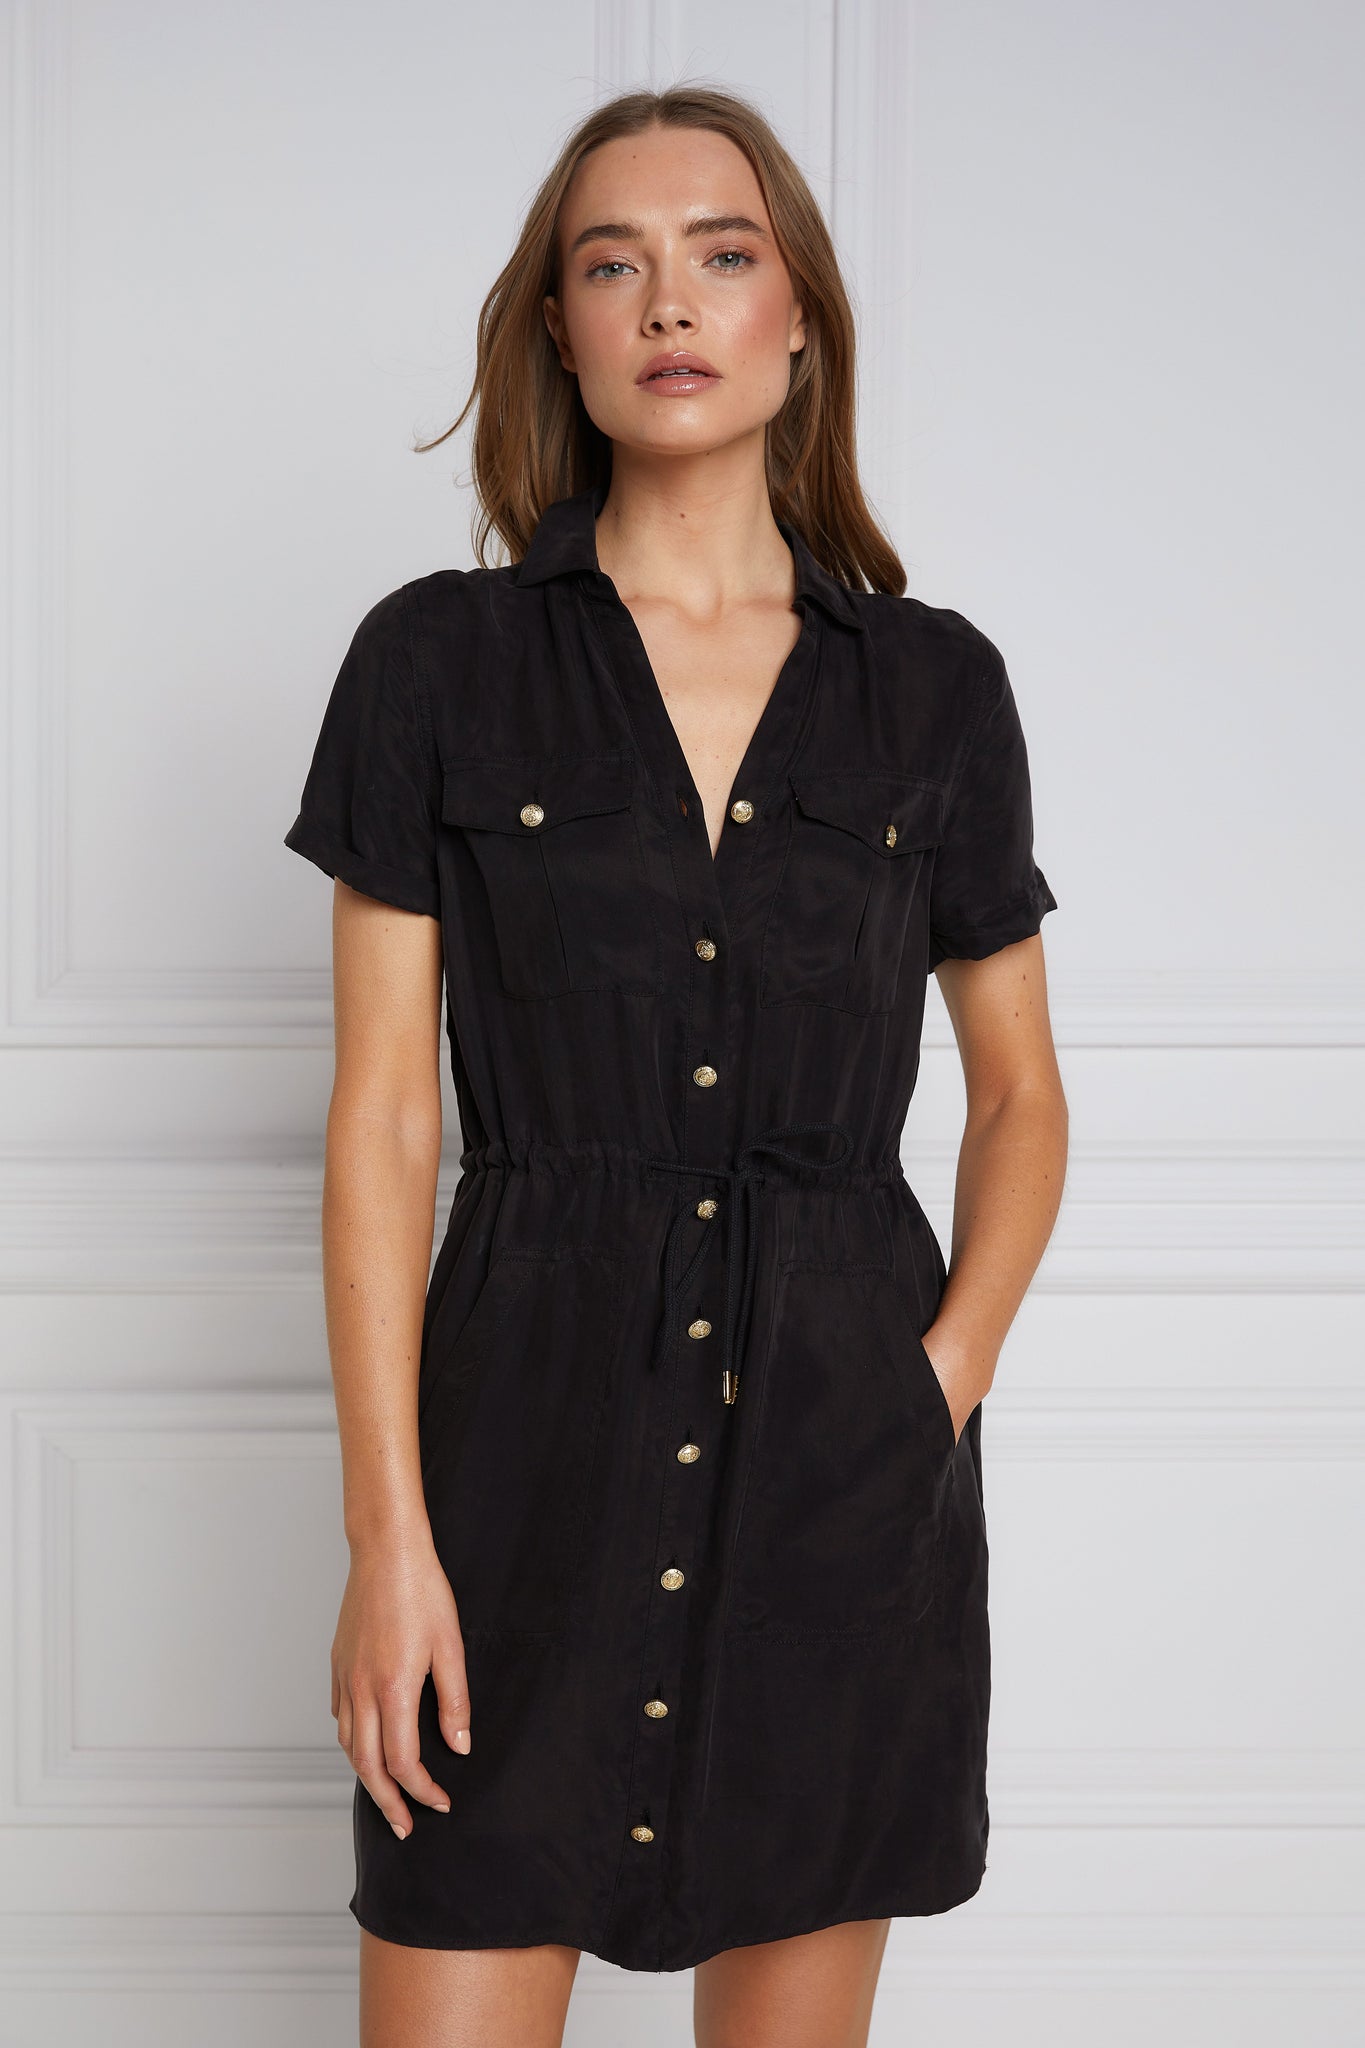 womens black military mini shirt dress with drawcord tie around the waist and gold buttons down the front